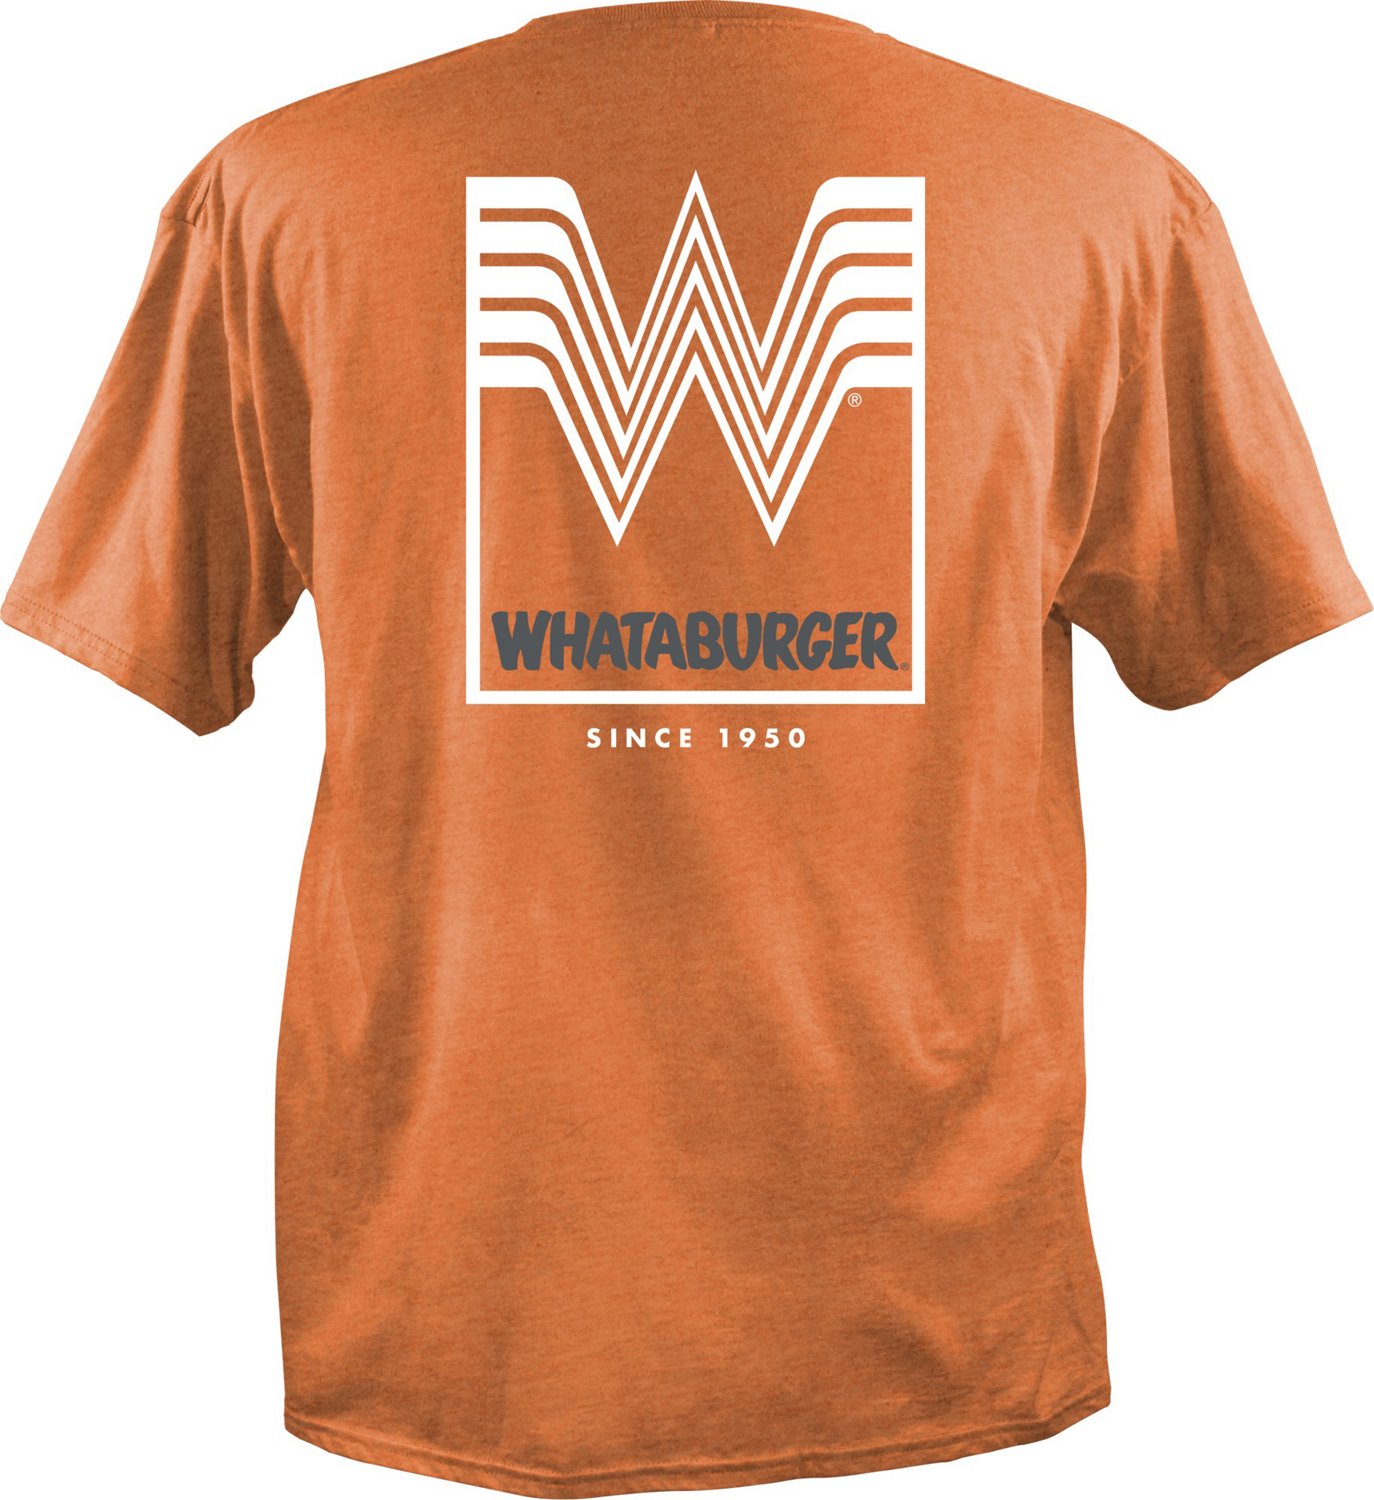 Shop Our Exclusive Whataburger Gear - Academy Sports + Outdoors